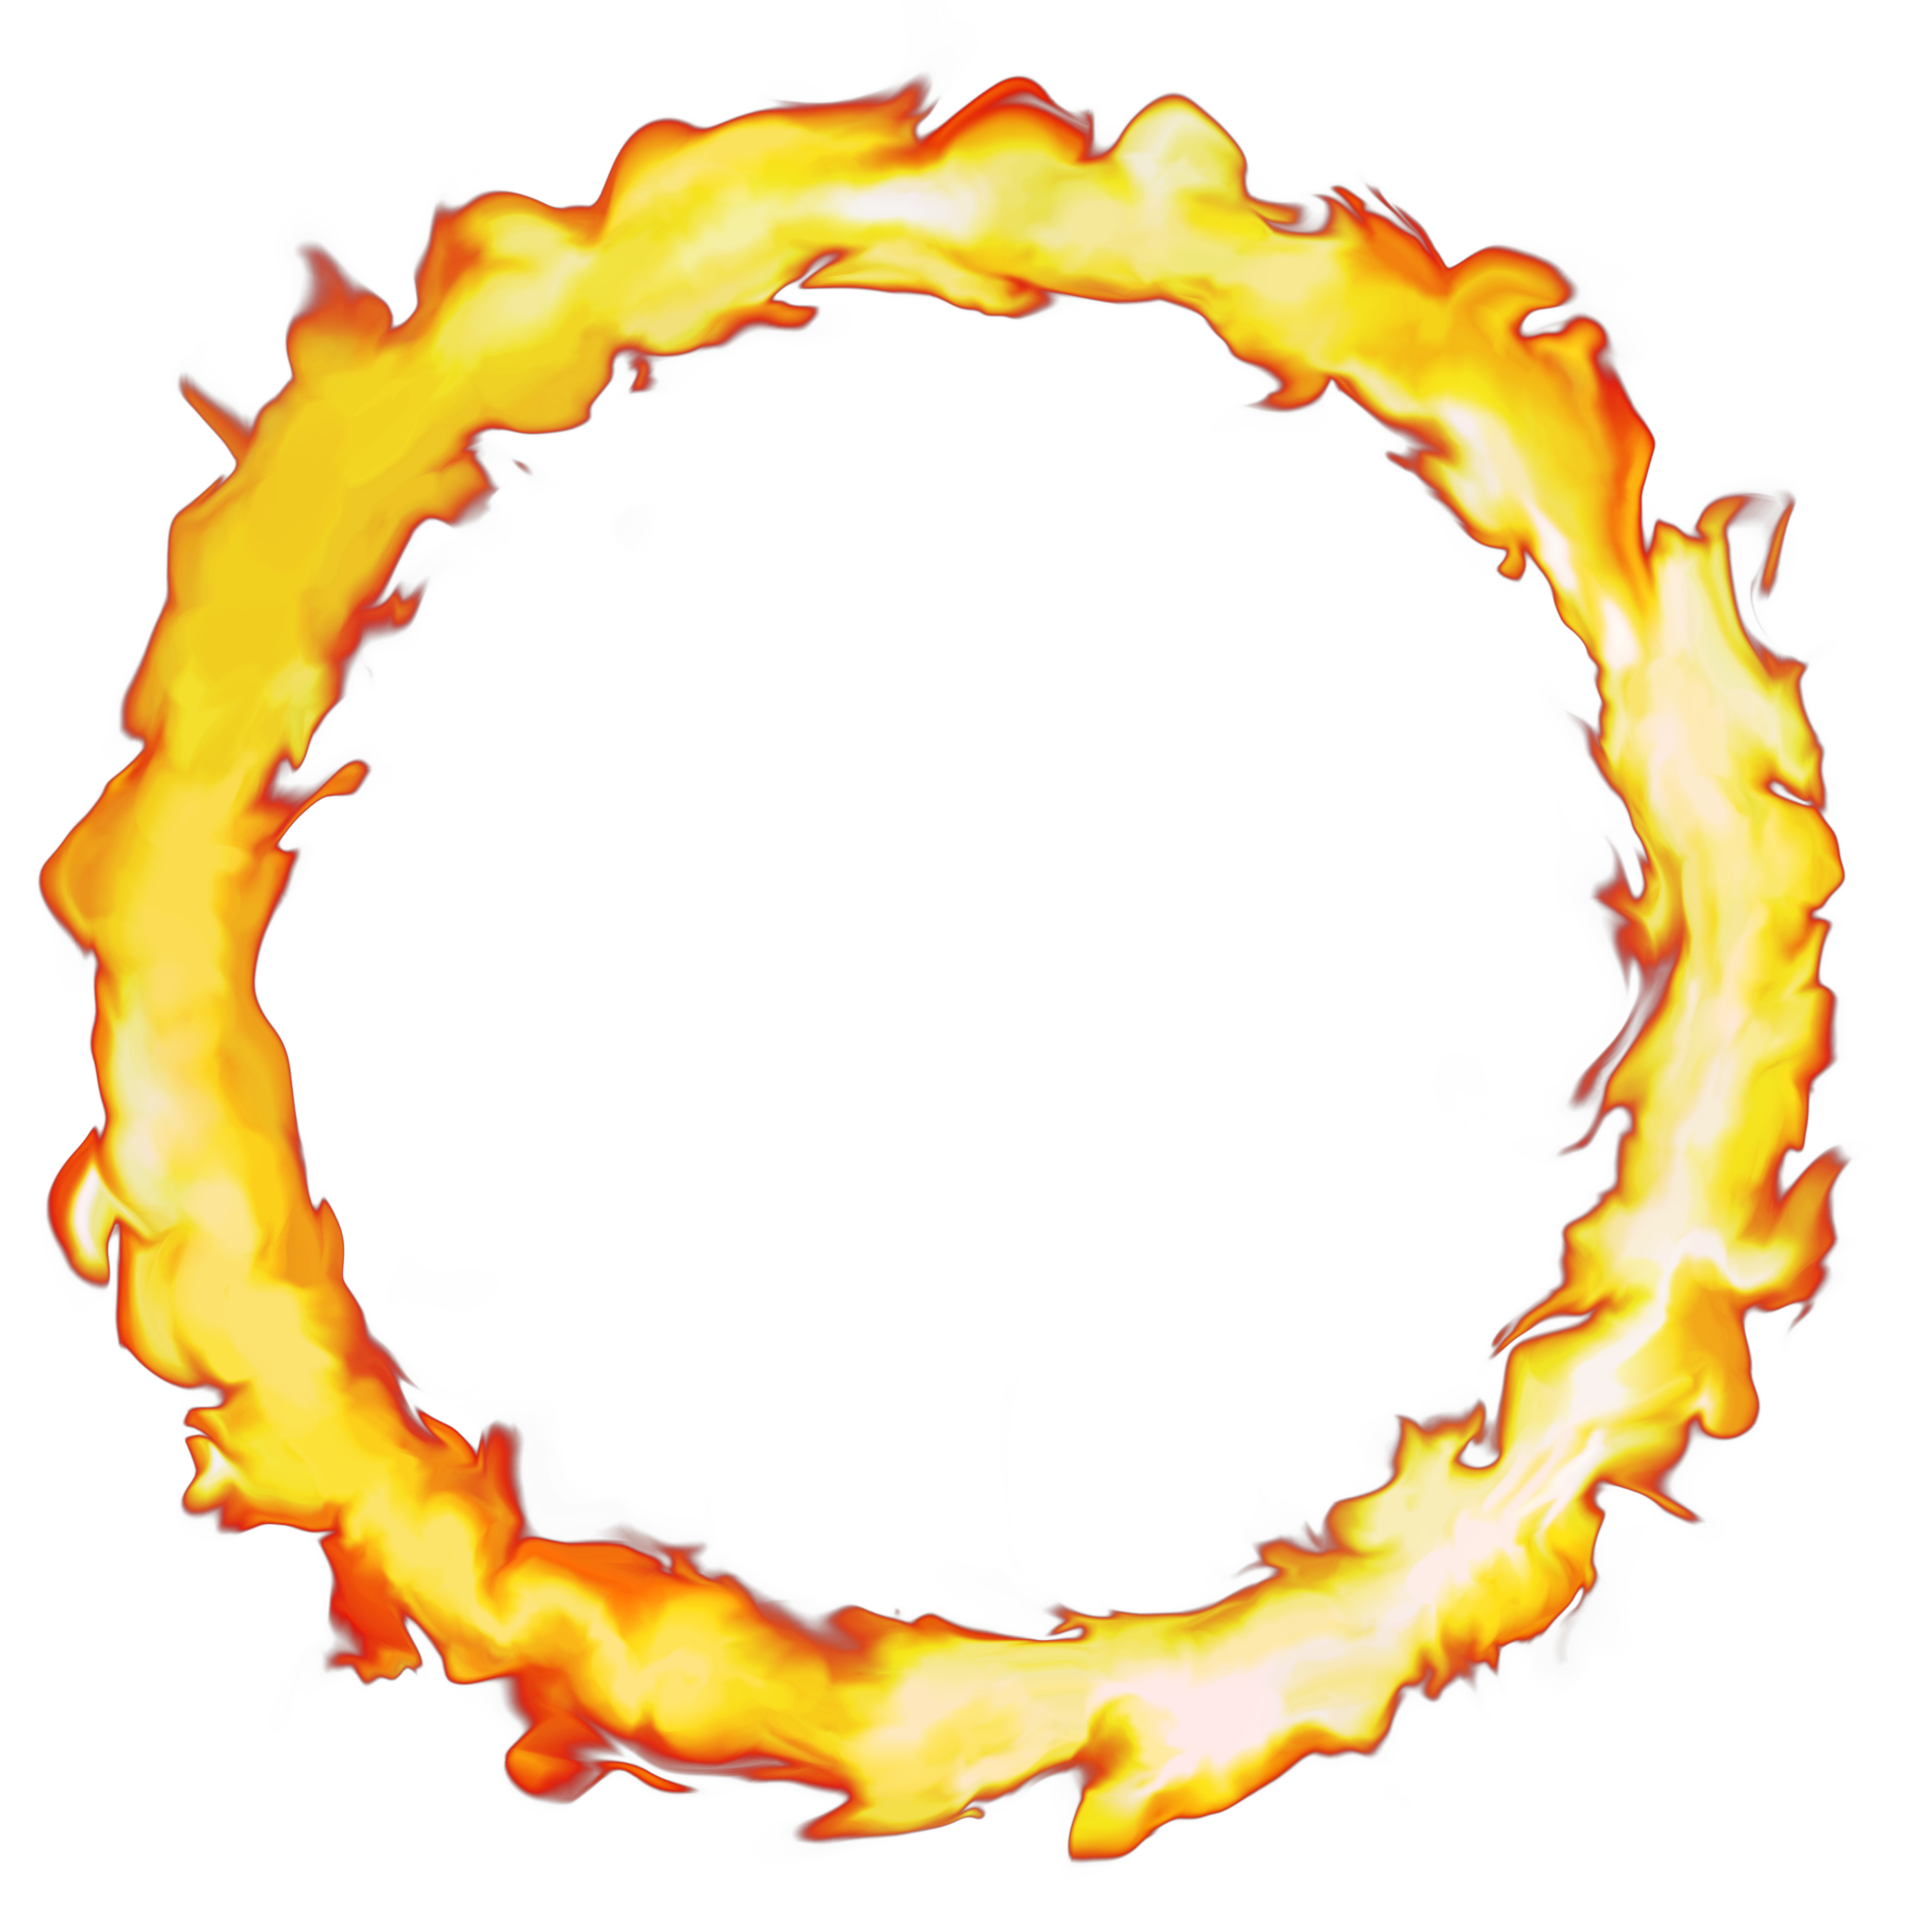 Ring Of Fire Clipart Free Transparent Png Download Pngkey | Images and ...